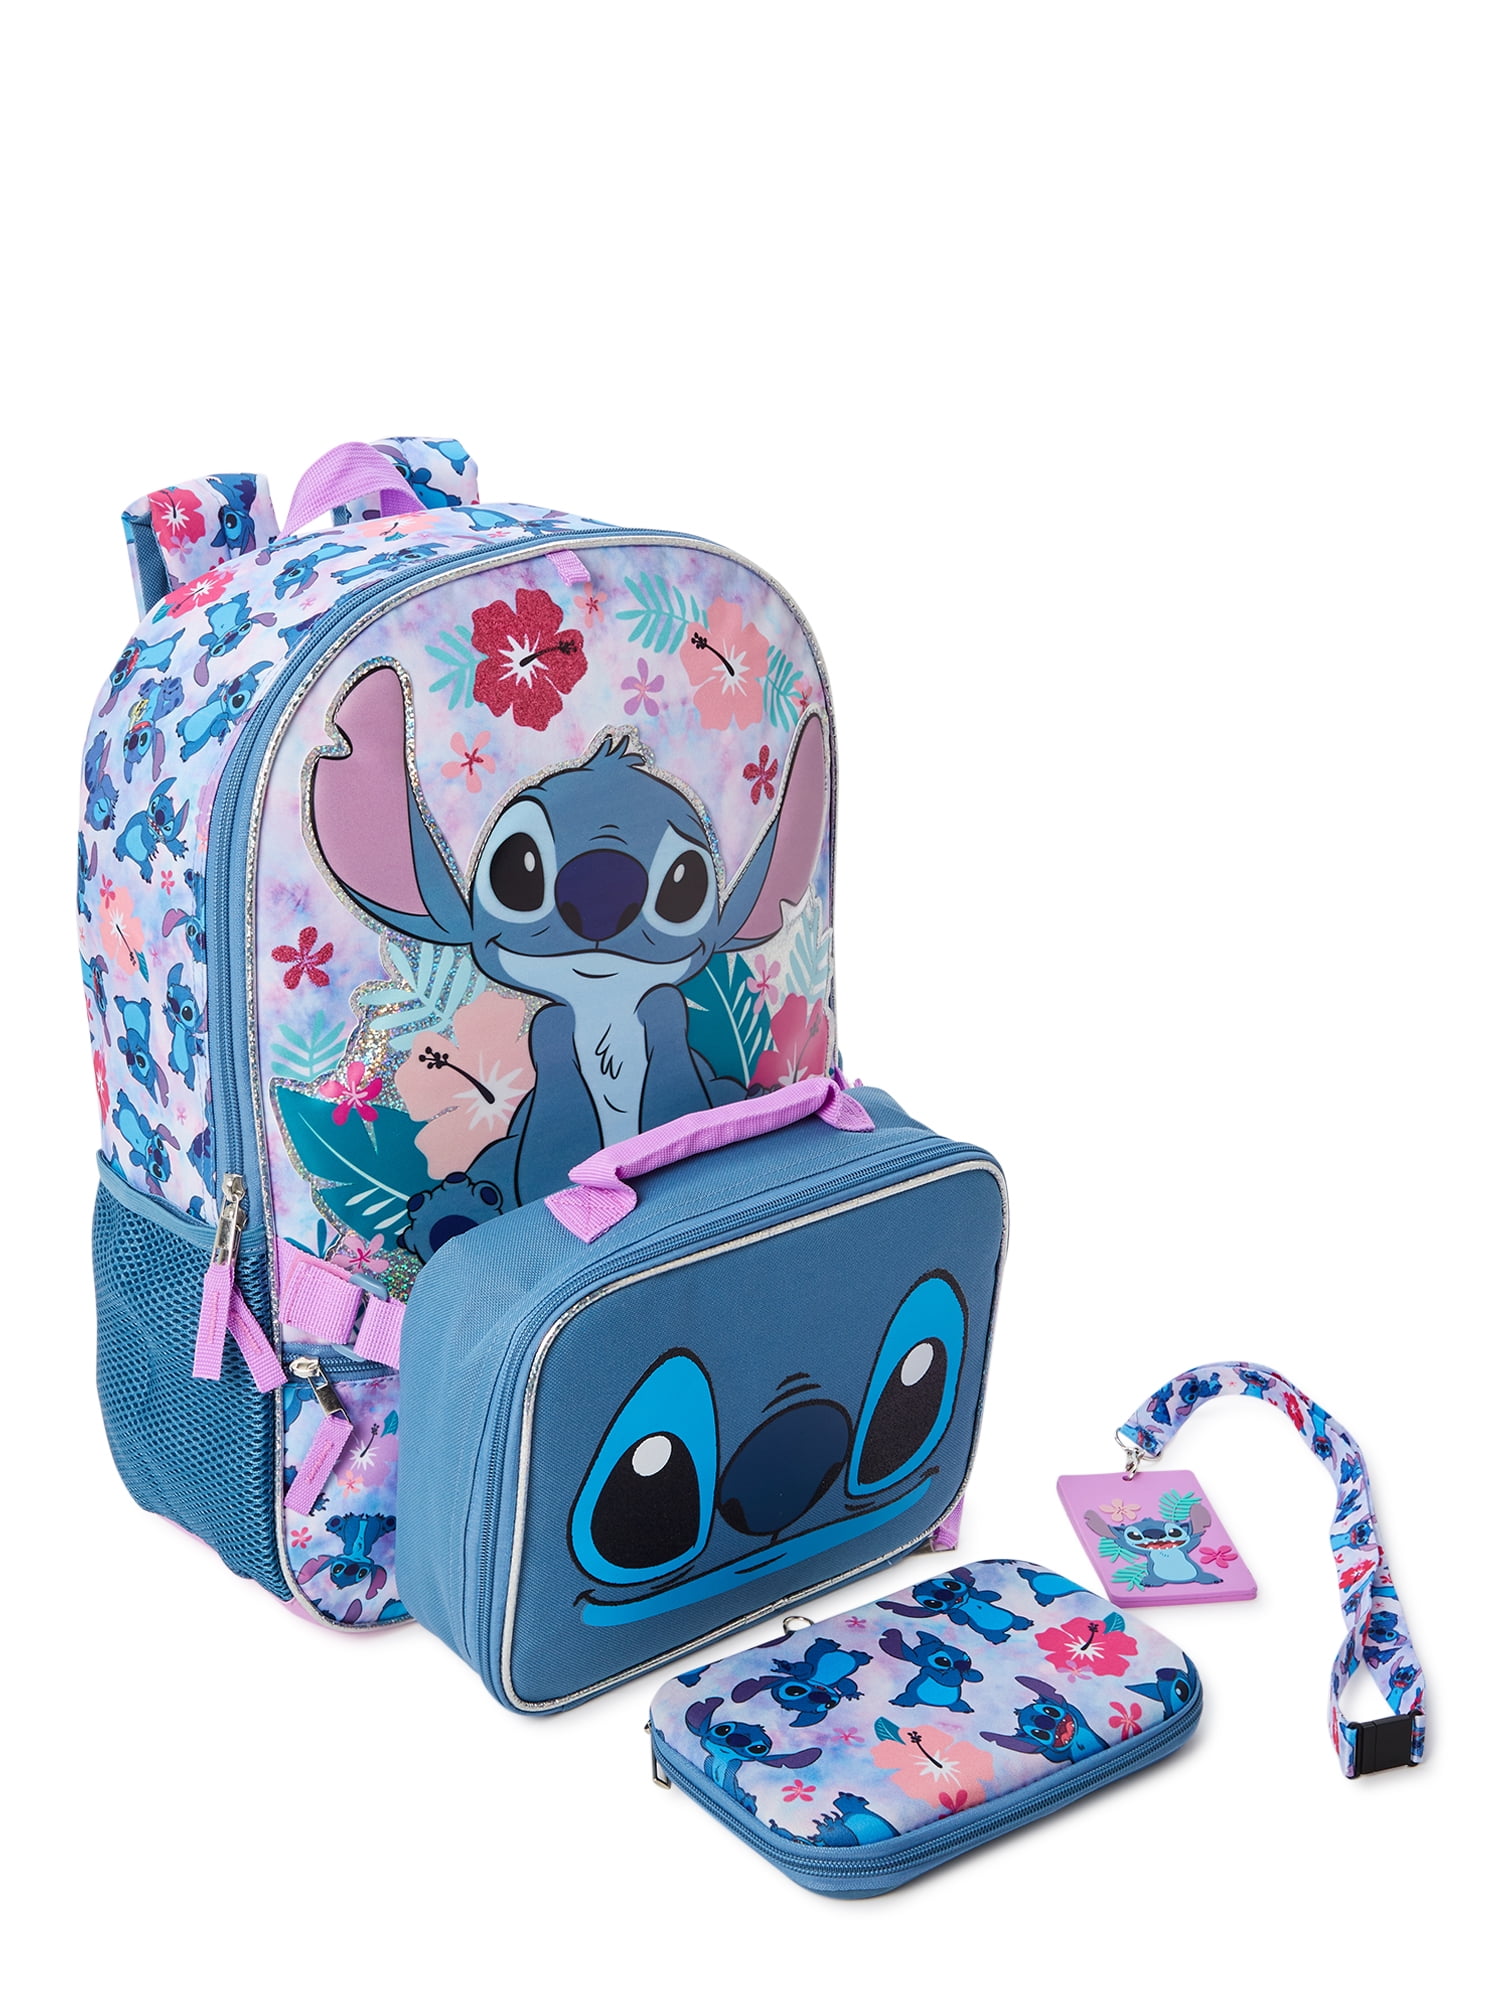 Disney Lilo and Stitch Backpack with Lunch Box Bundle - Stitch School  Supplies, Lunch Bag, Water Bottle, Stickers, More for School